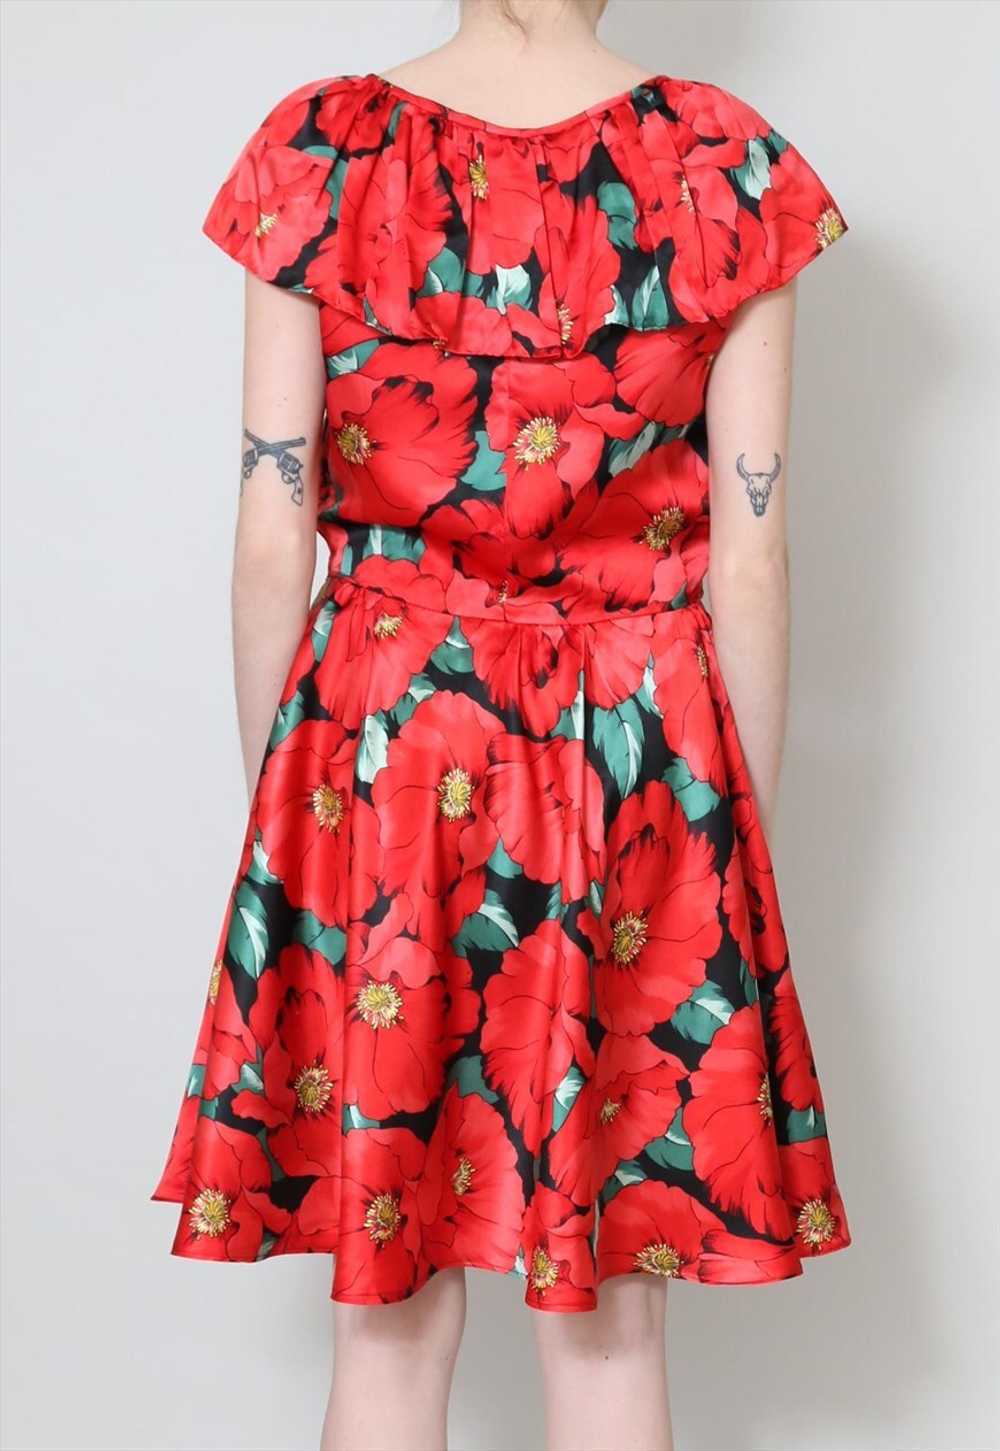 80's Vintage Dress Red Floral Ruffle Collar Mini - image 4